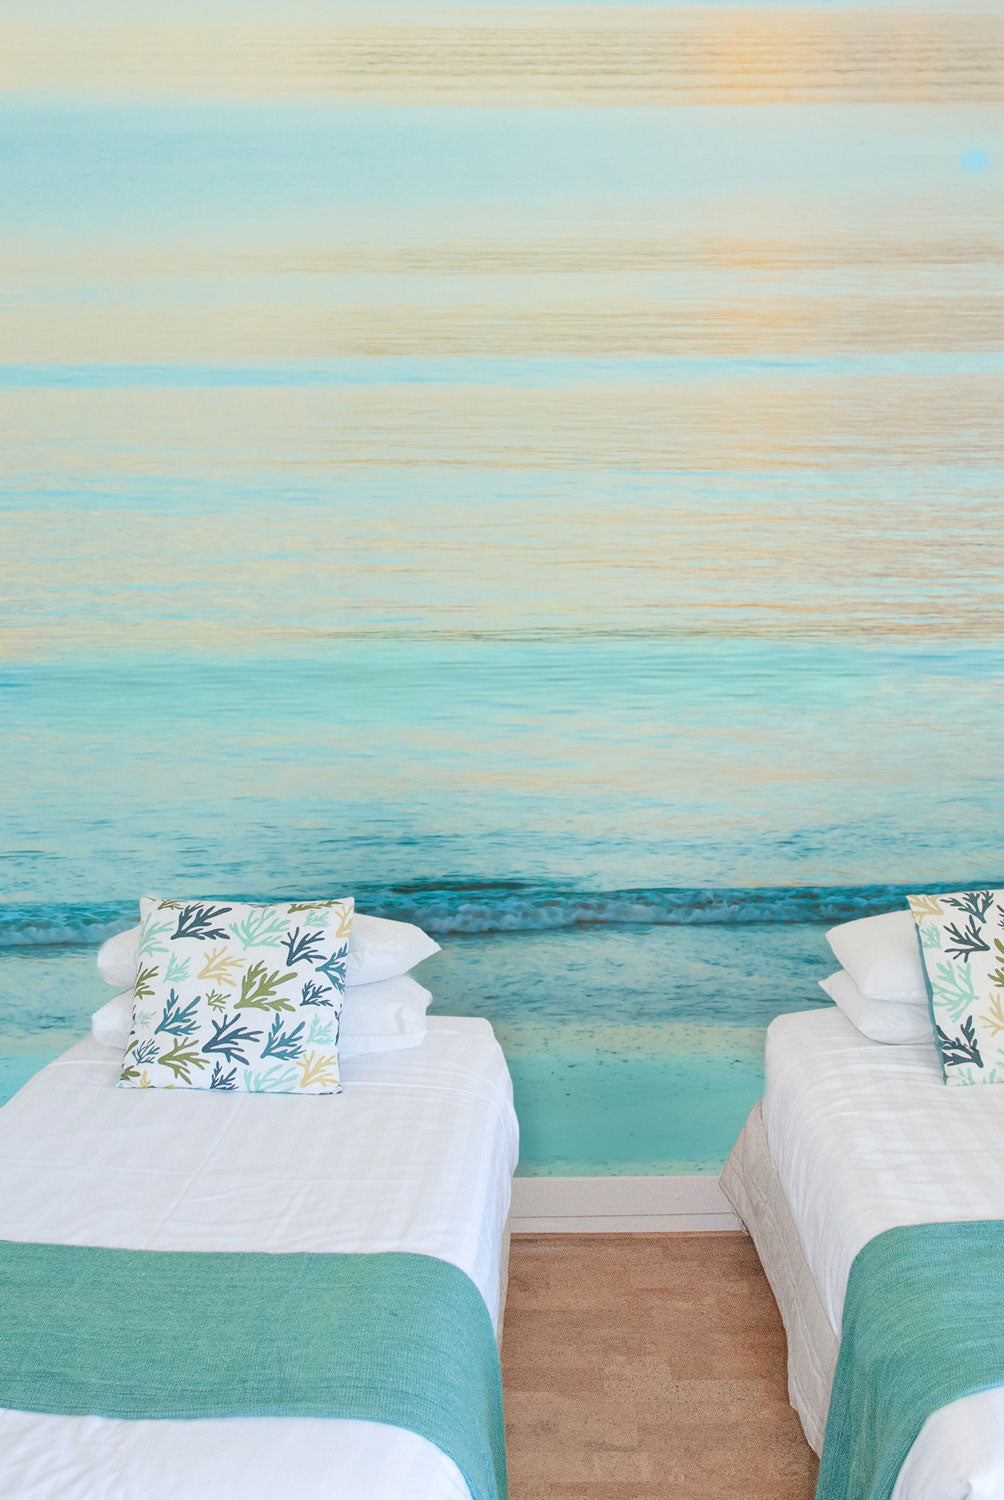 Sunset Shoreline | Surfing Sea Ocean Wall Mural by Back to the Wall